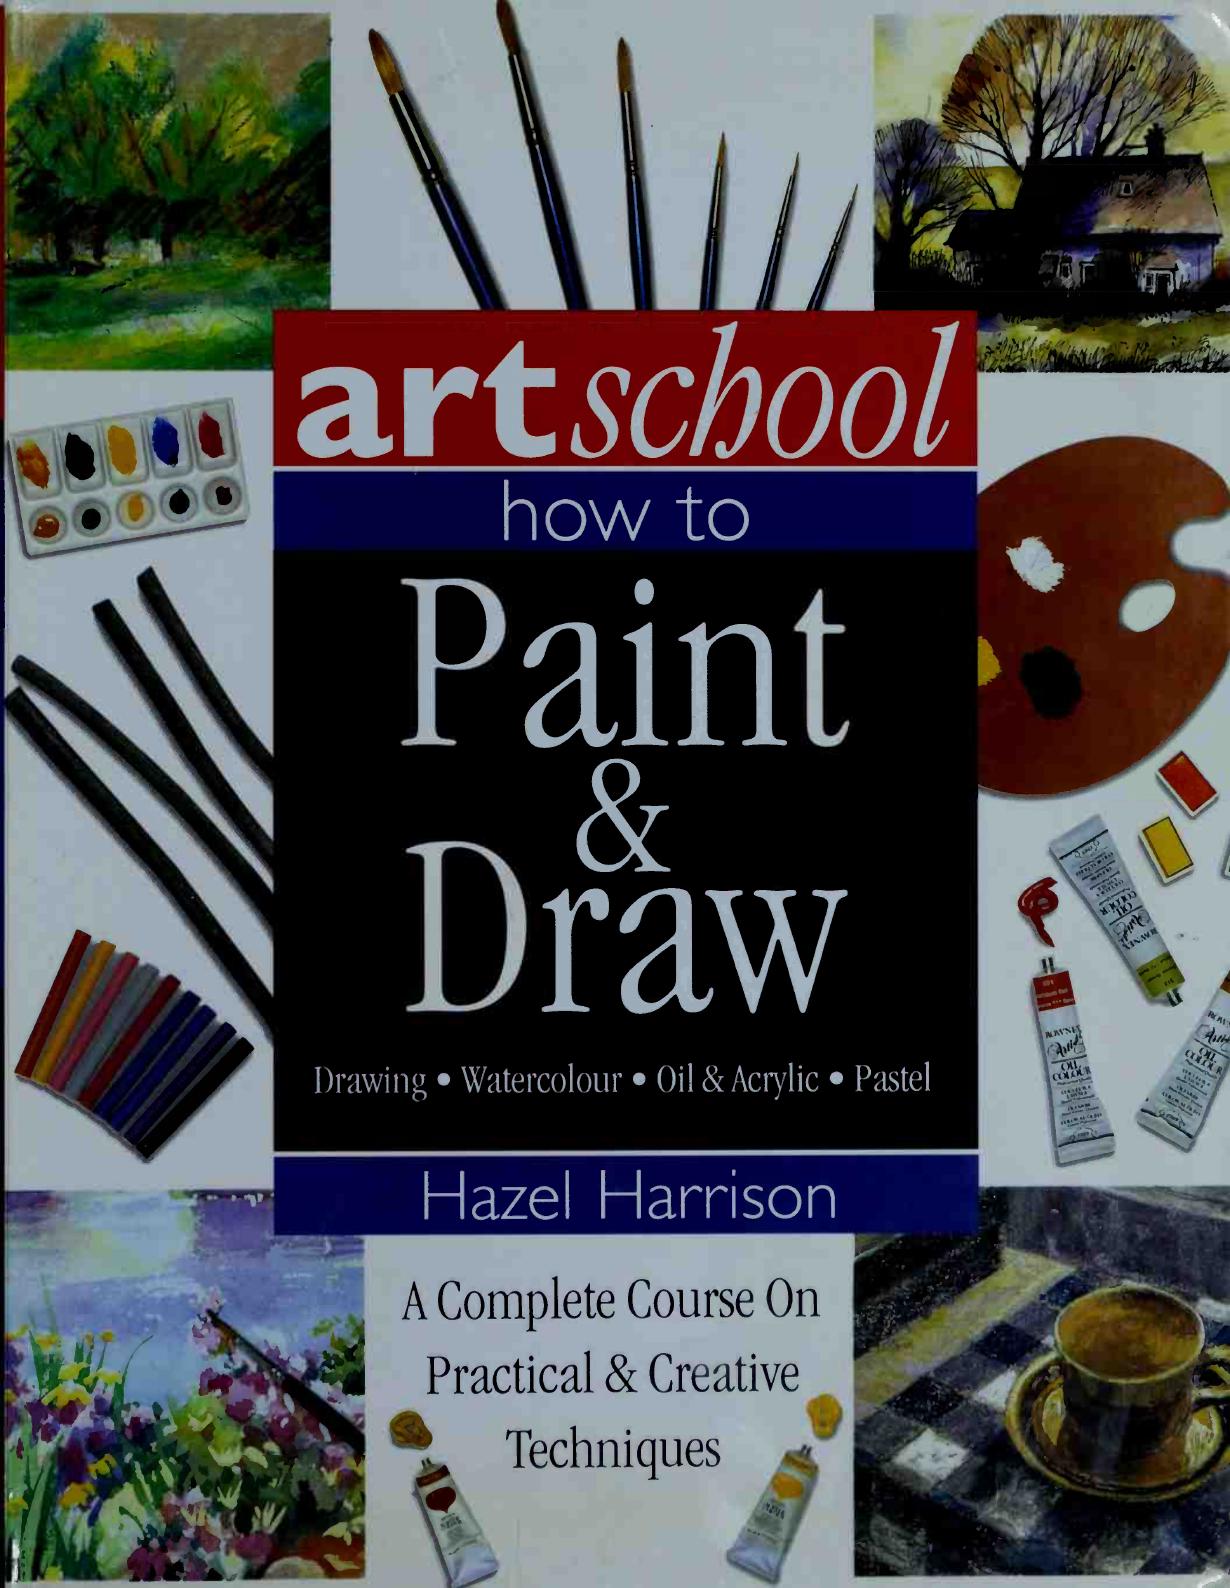 Art School How to Paint & Draw Drawing, 2015